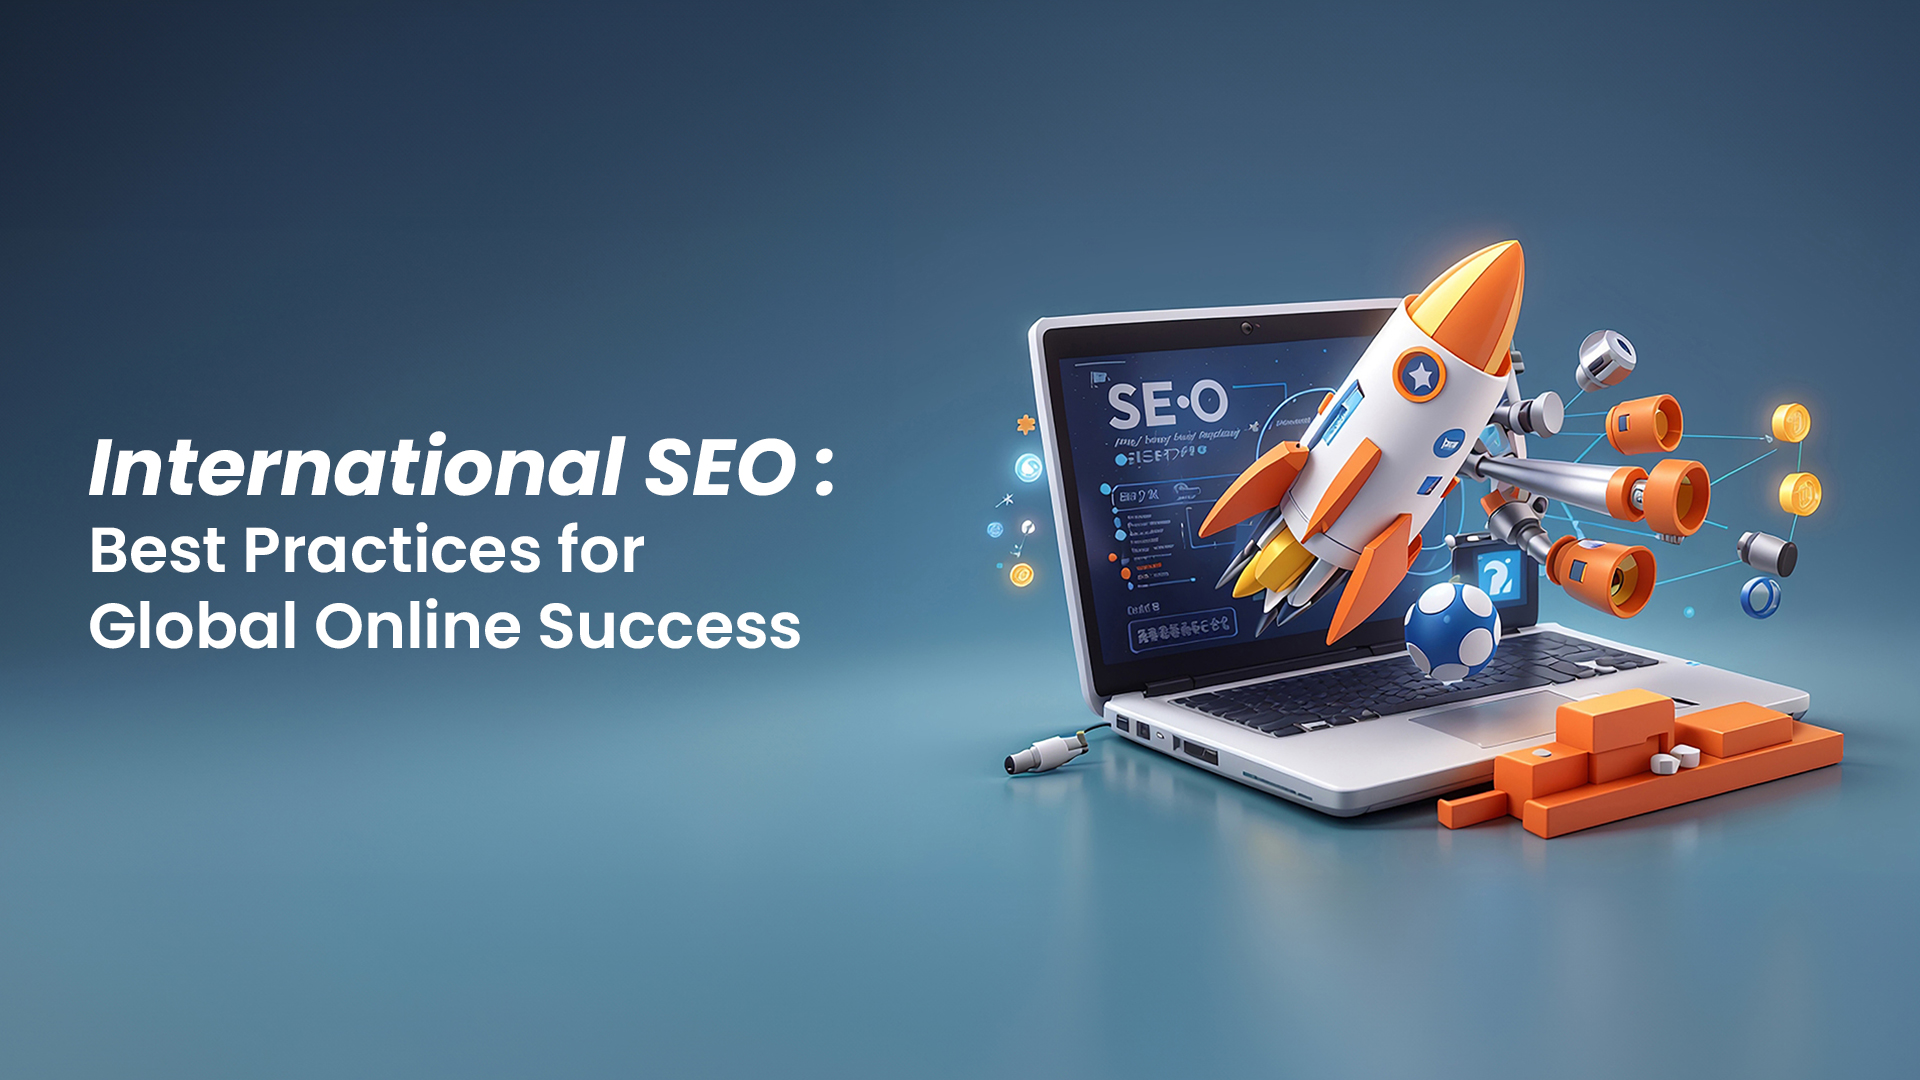 International SEO Best Practices for Global Online Success.